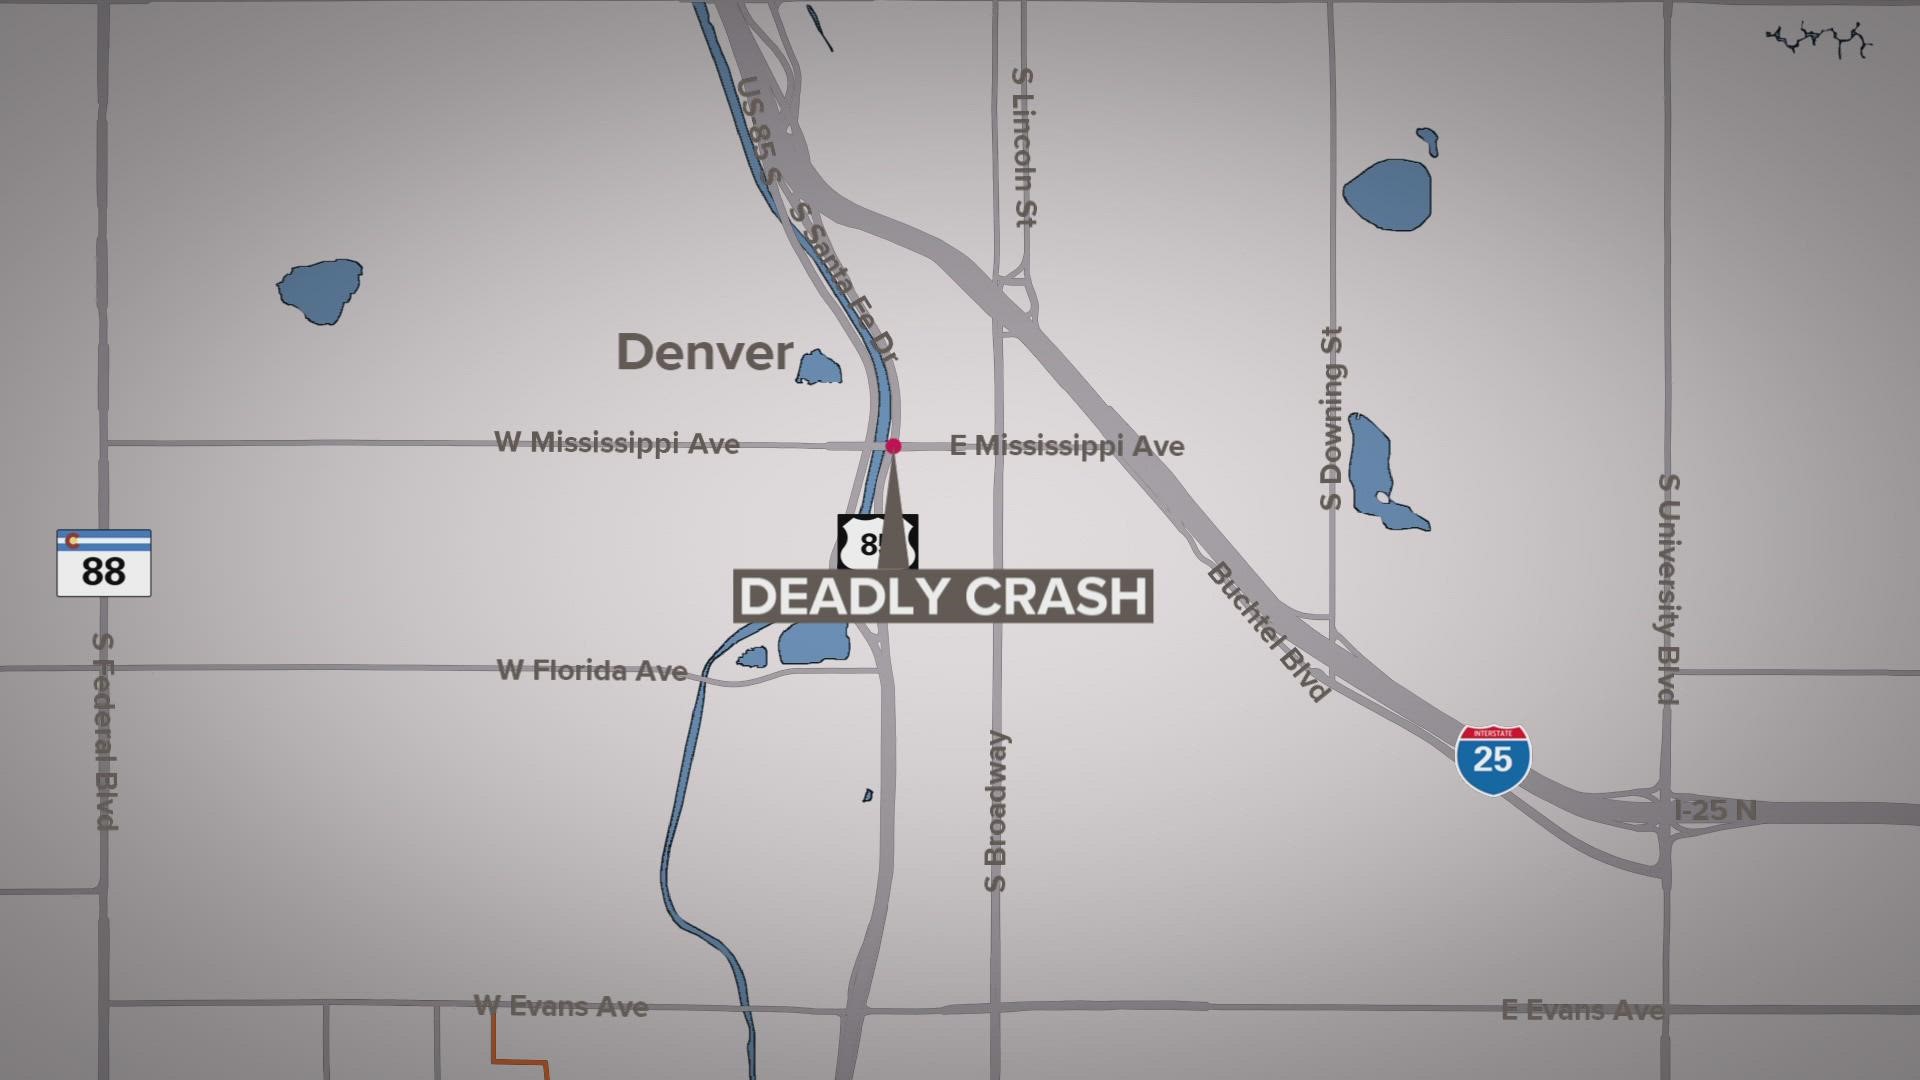 Police said a man and a woman died in the crash on Sunday morning.